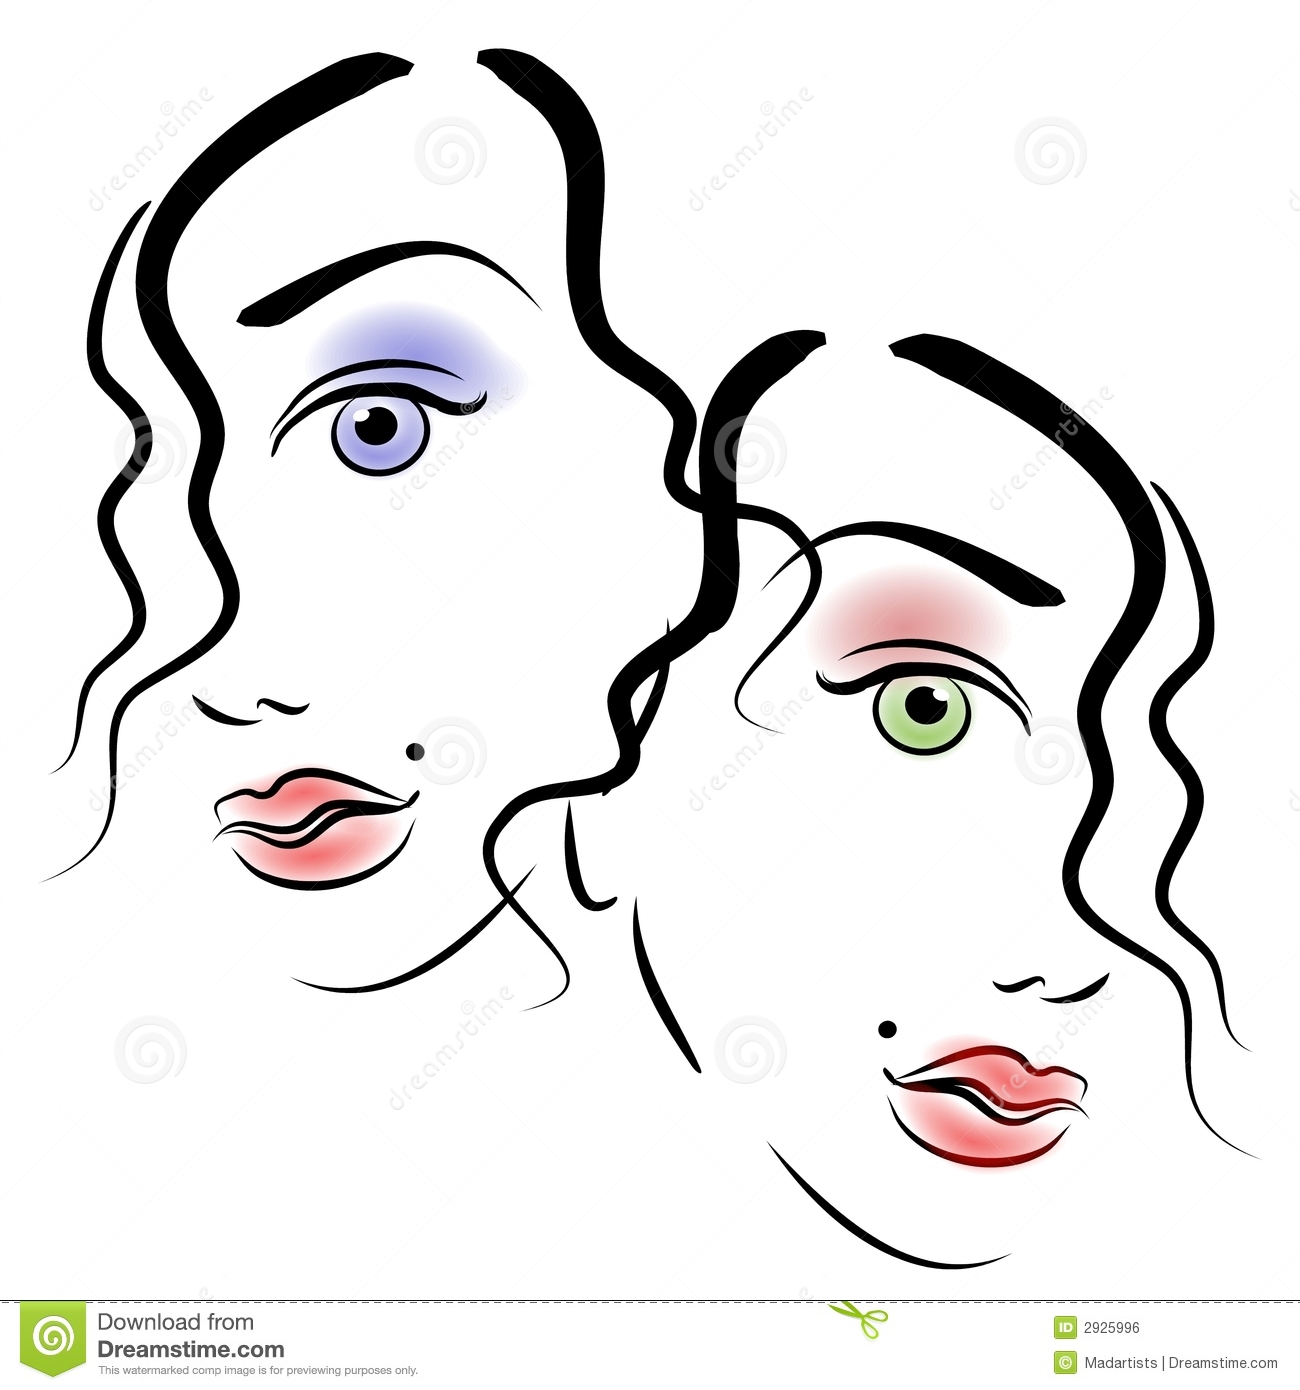 Art Portrait Of 2 Women S Faces In Black Outlines And Colored Eyes